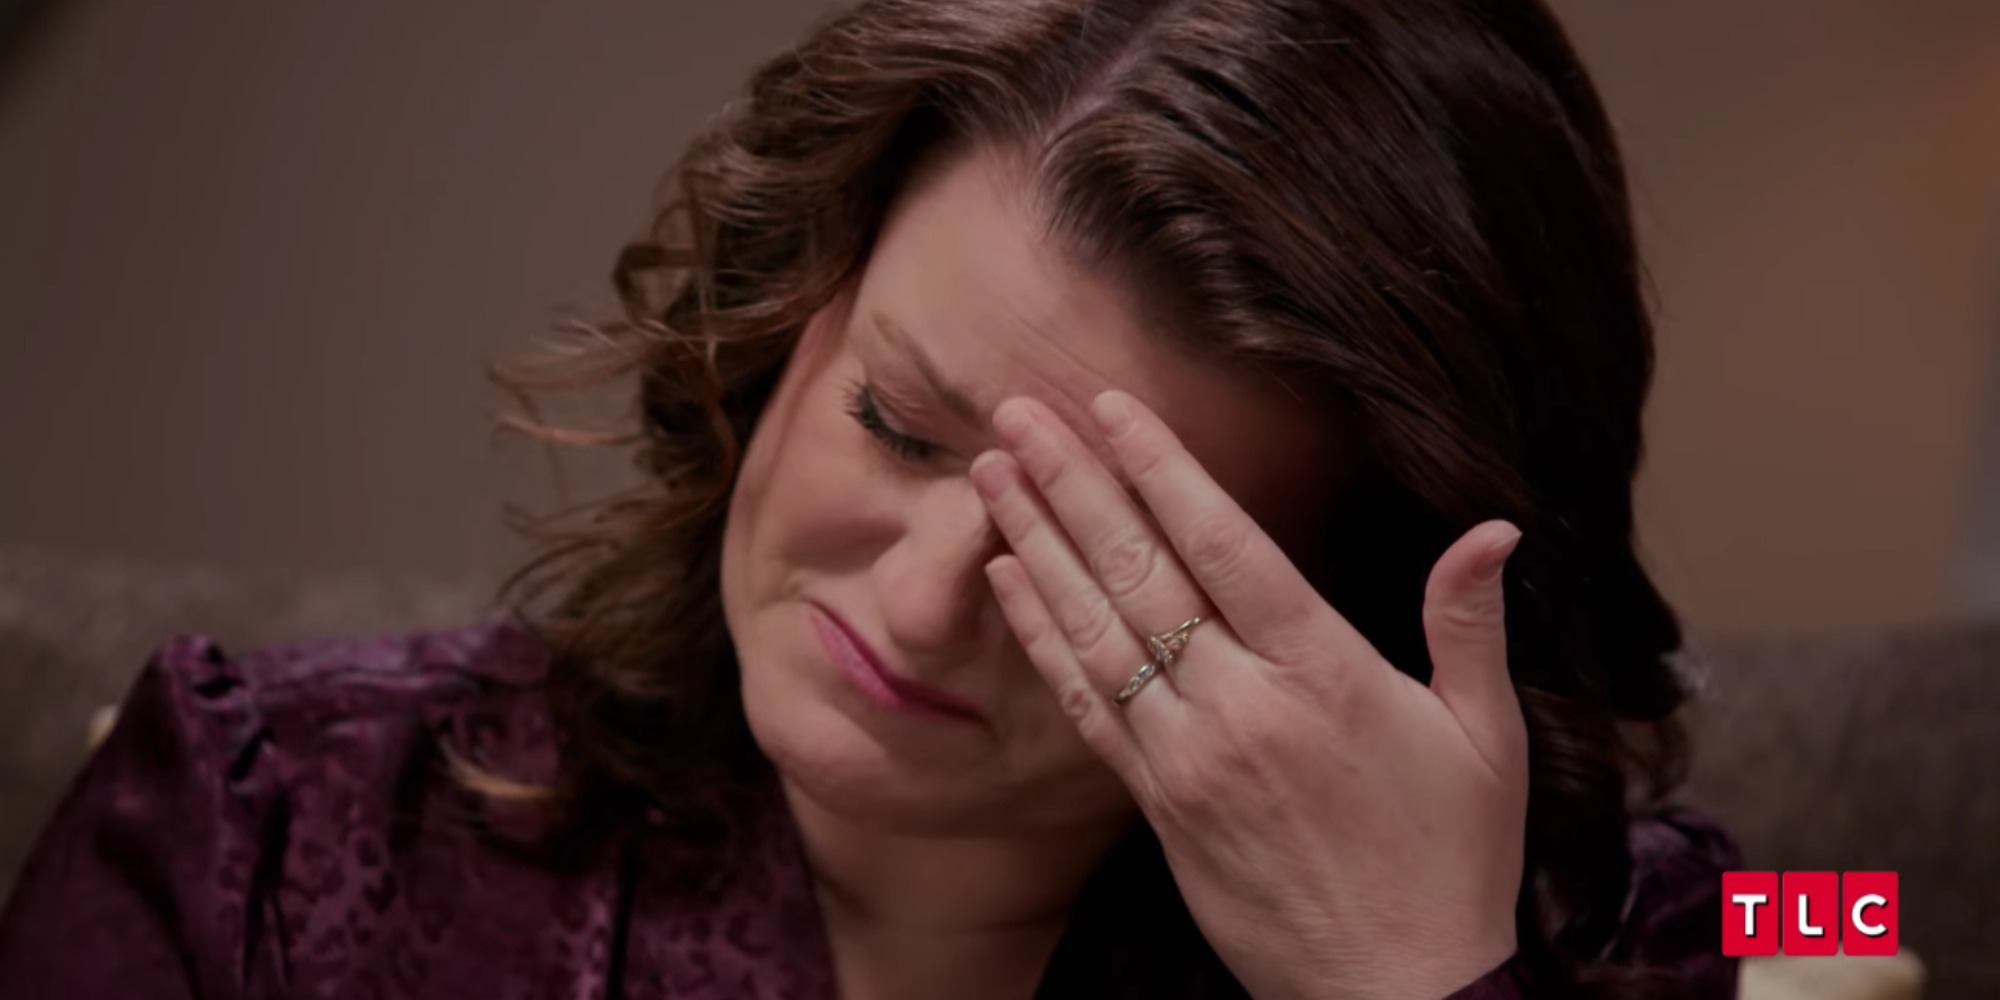 Robyn Brown cries during the first installment of the "Sister Wives" tell-all.